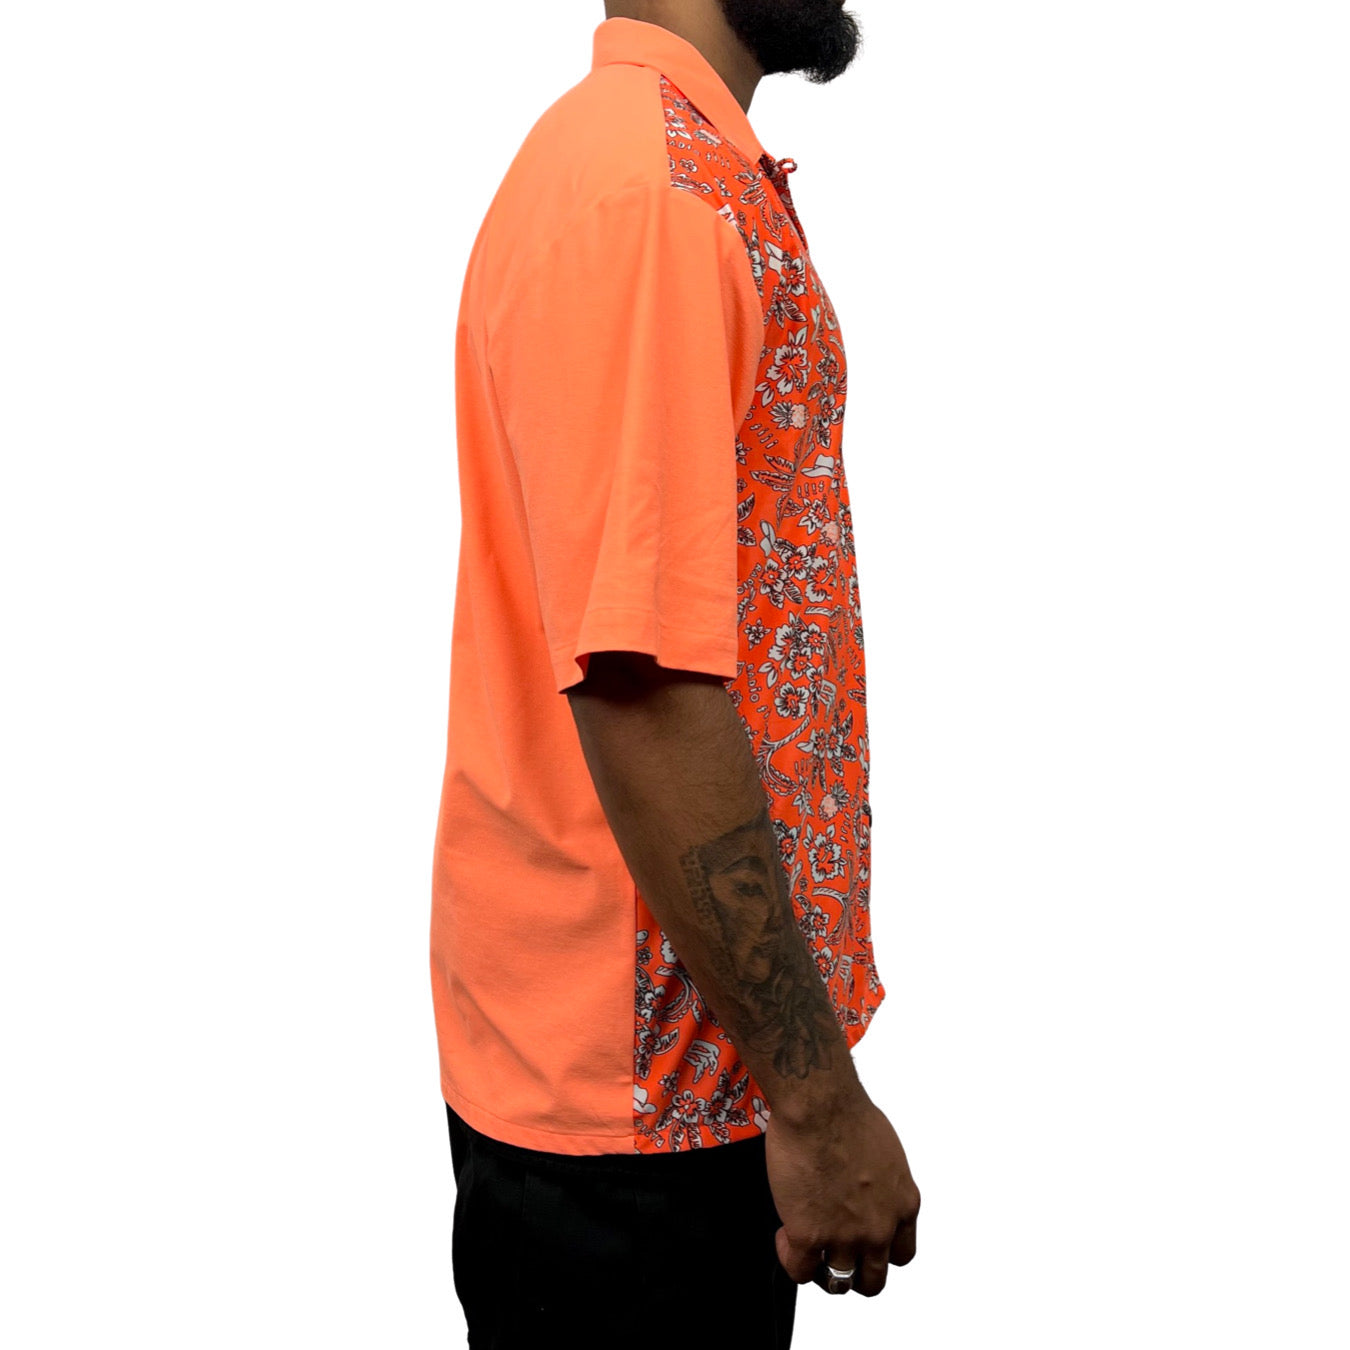 LIMITED EDITION Button-Up in Orange